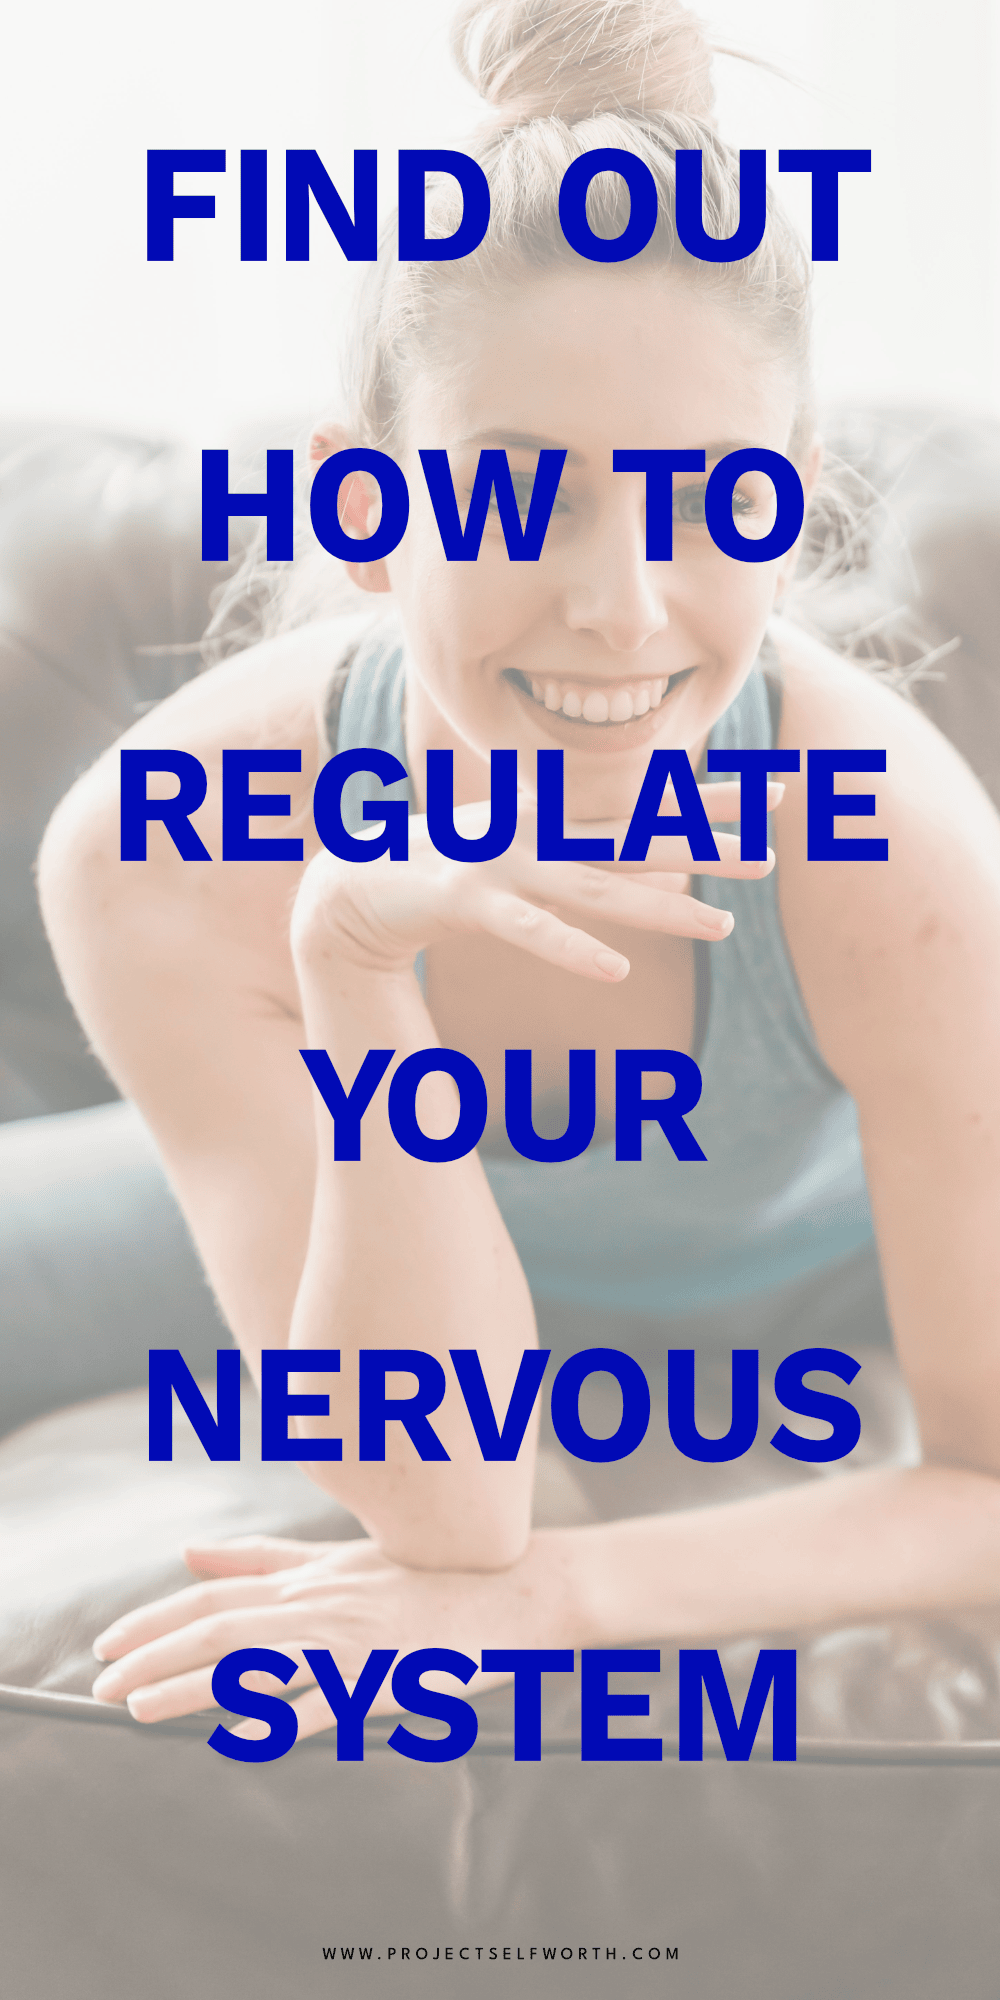 woman doing yoga and smiling while regulating her nervous system